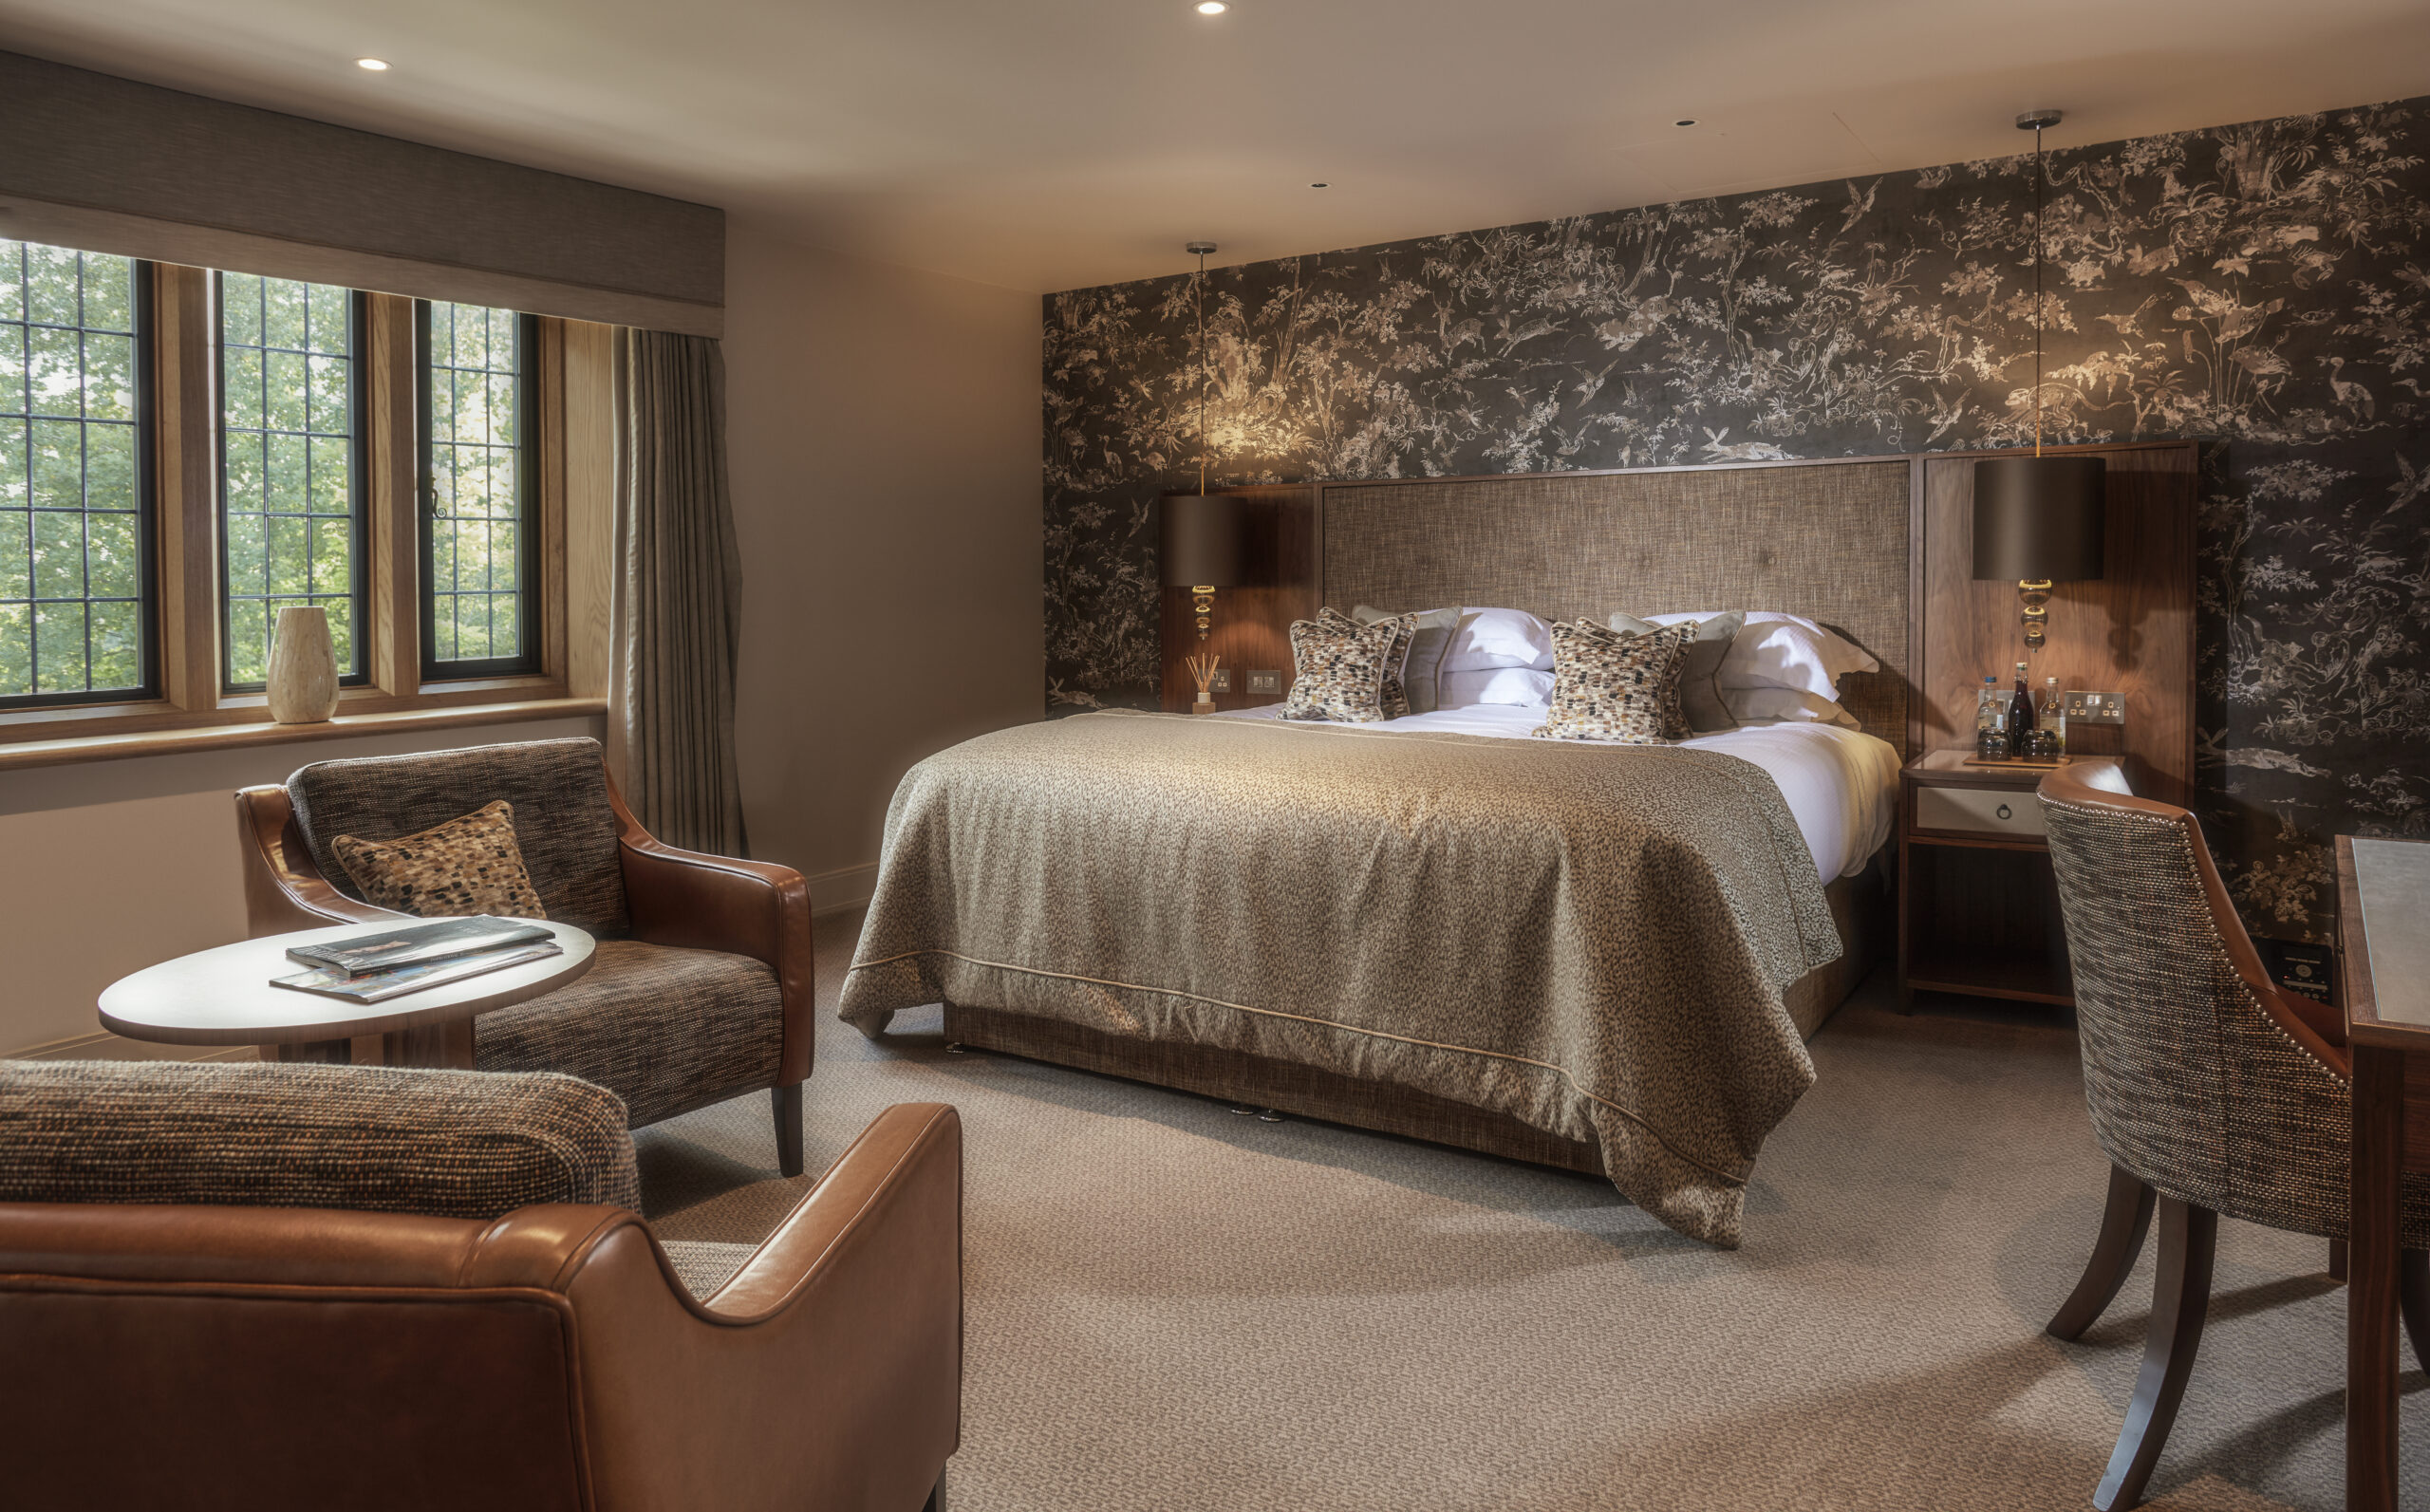 Doppelzimmer Mallory Court Country House Hotel & Spa, Leamington Spa, England